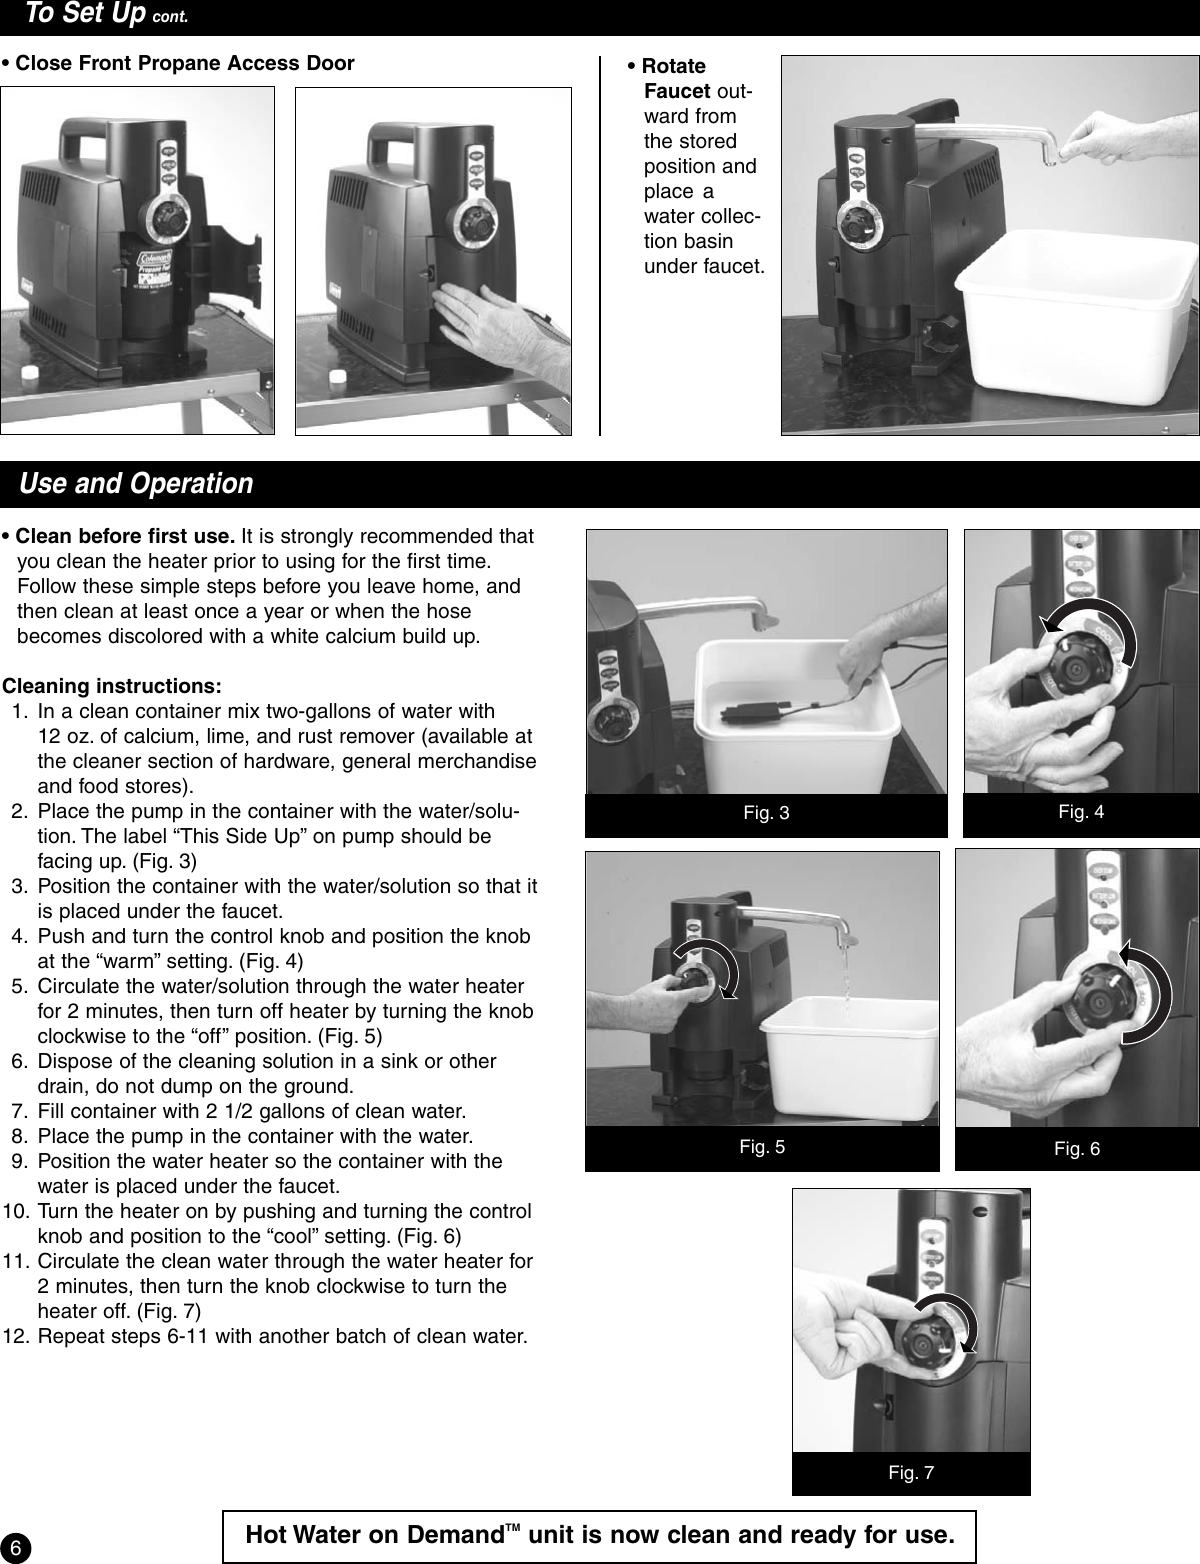 Page 6 of 12 - Coleman Coleman-2300-Series-Users-Manual- 2300B050 - Hot Water On Demand  Coleman-2300-series-users-manual